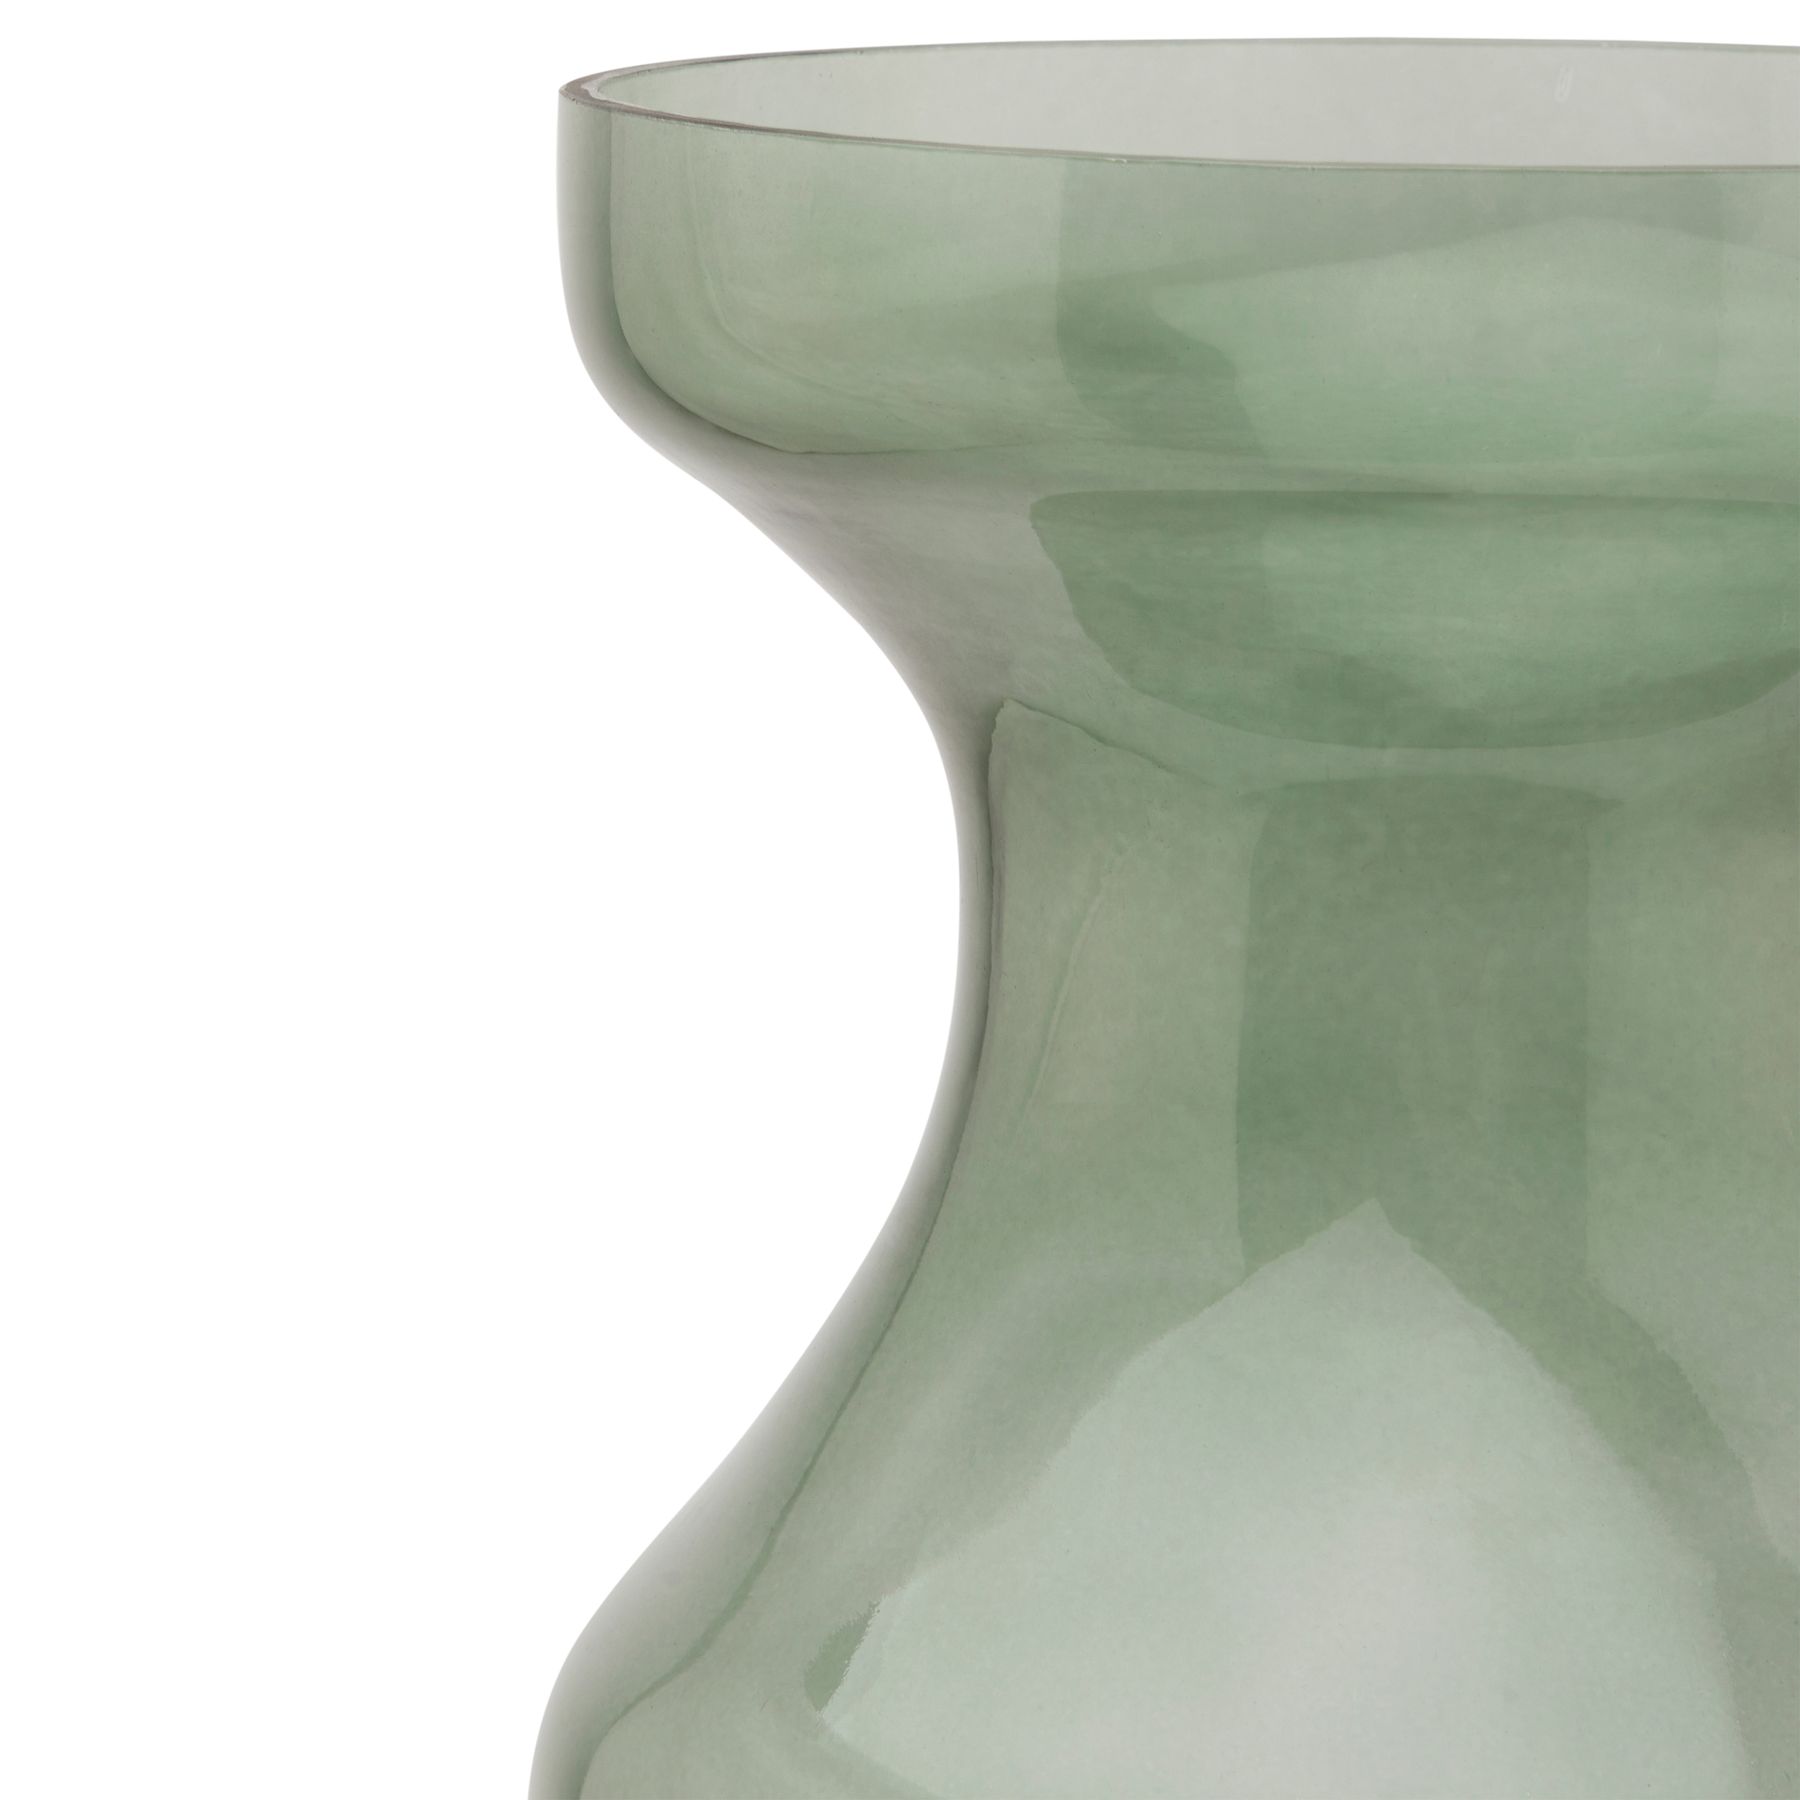 Smoked Sage Glass Tall Fluted Vase - Image 2